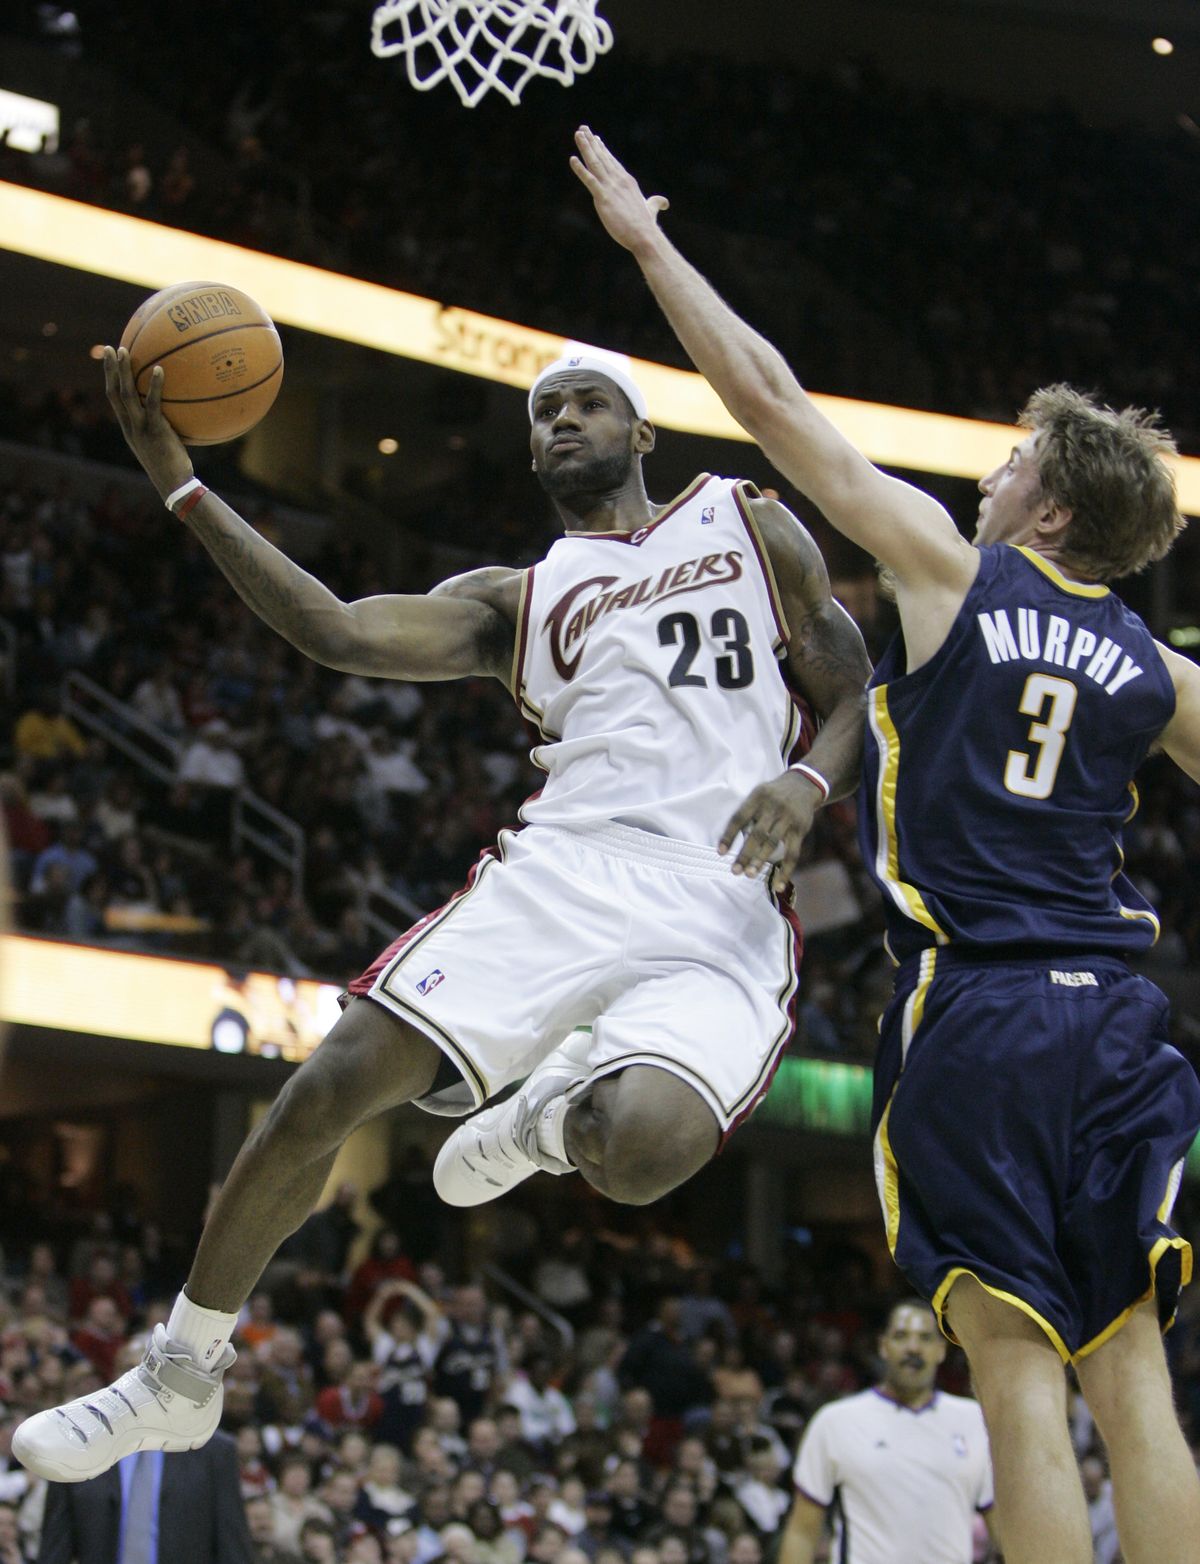 LeBron James will again don the jersey of the Cleveland Cavaliers. (Associated Press)